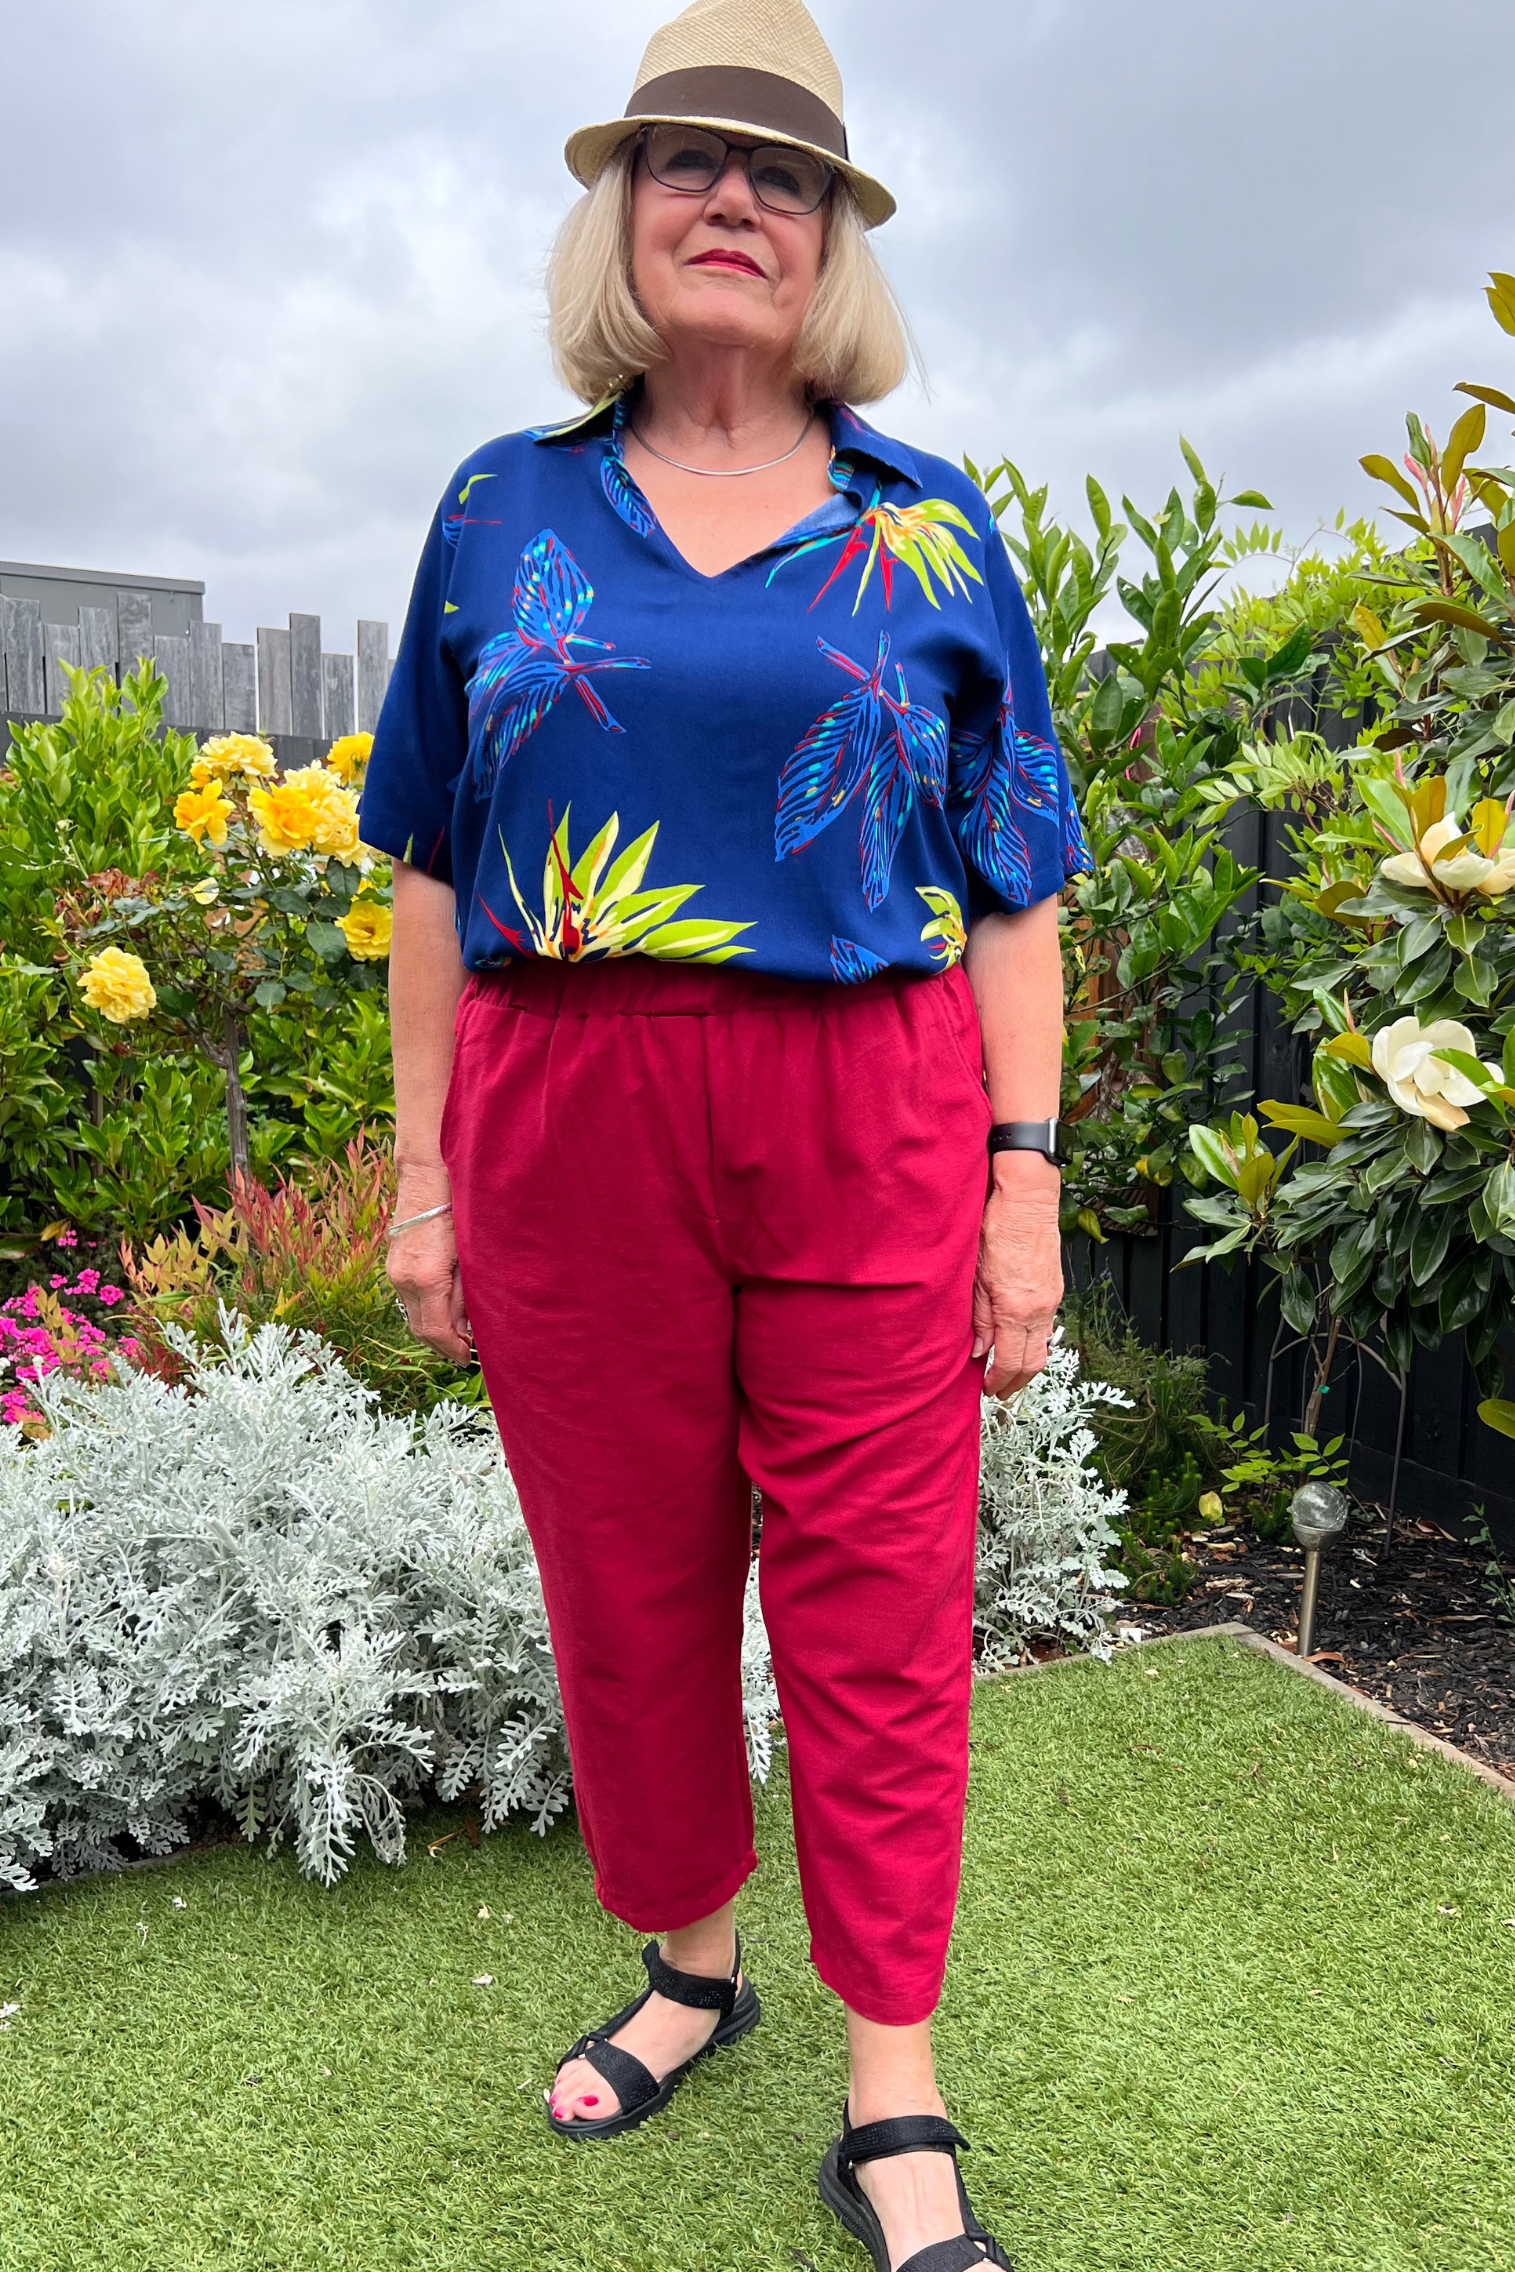 Kita Ku modelling the new pant port in the Raspberry colour along with a Blue Paradise print top Rebecca.